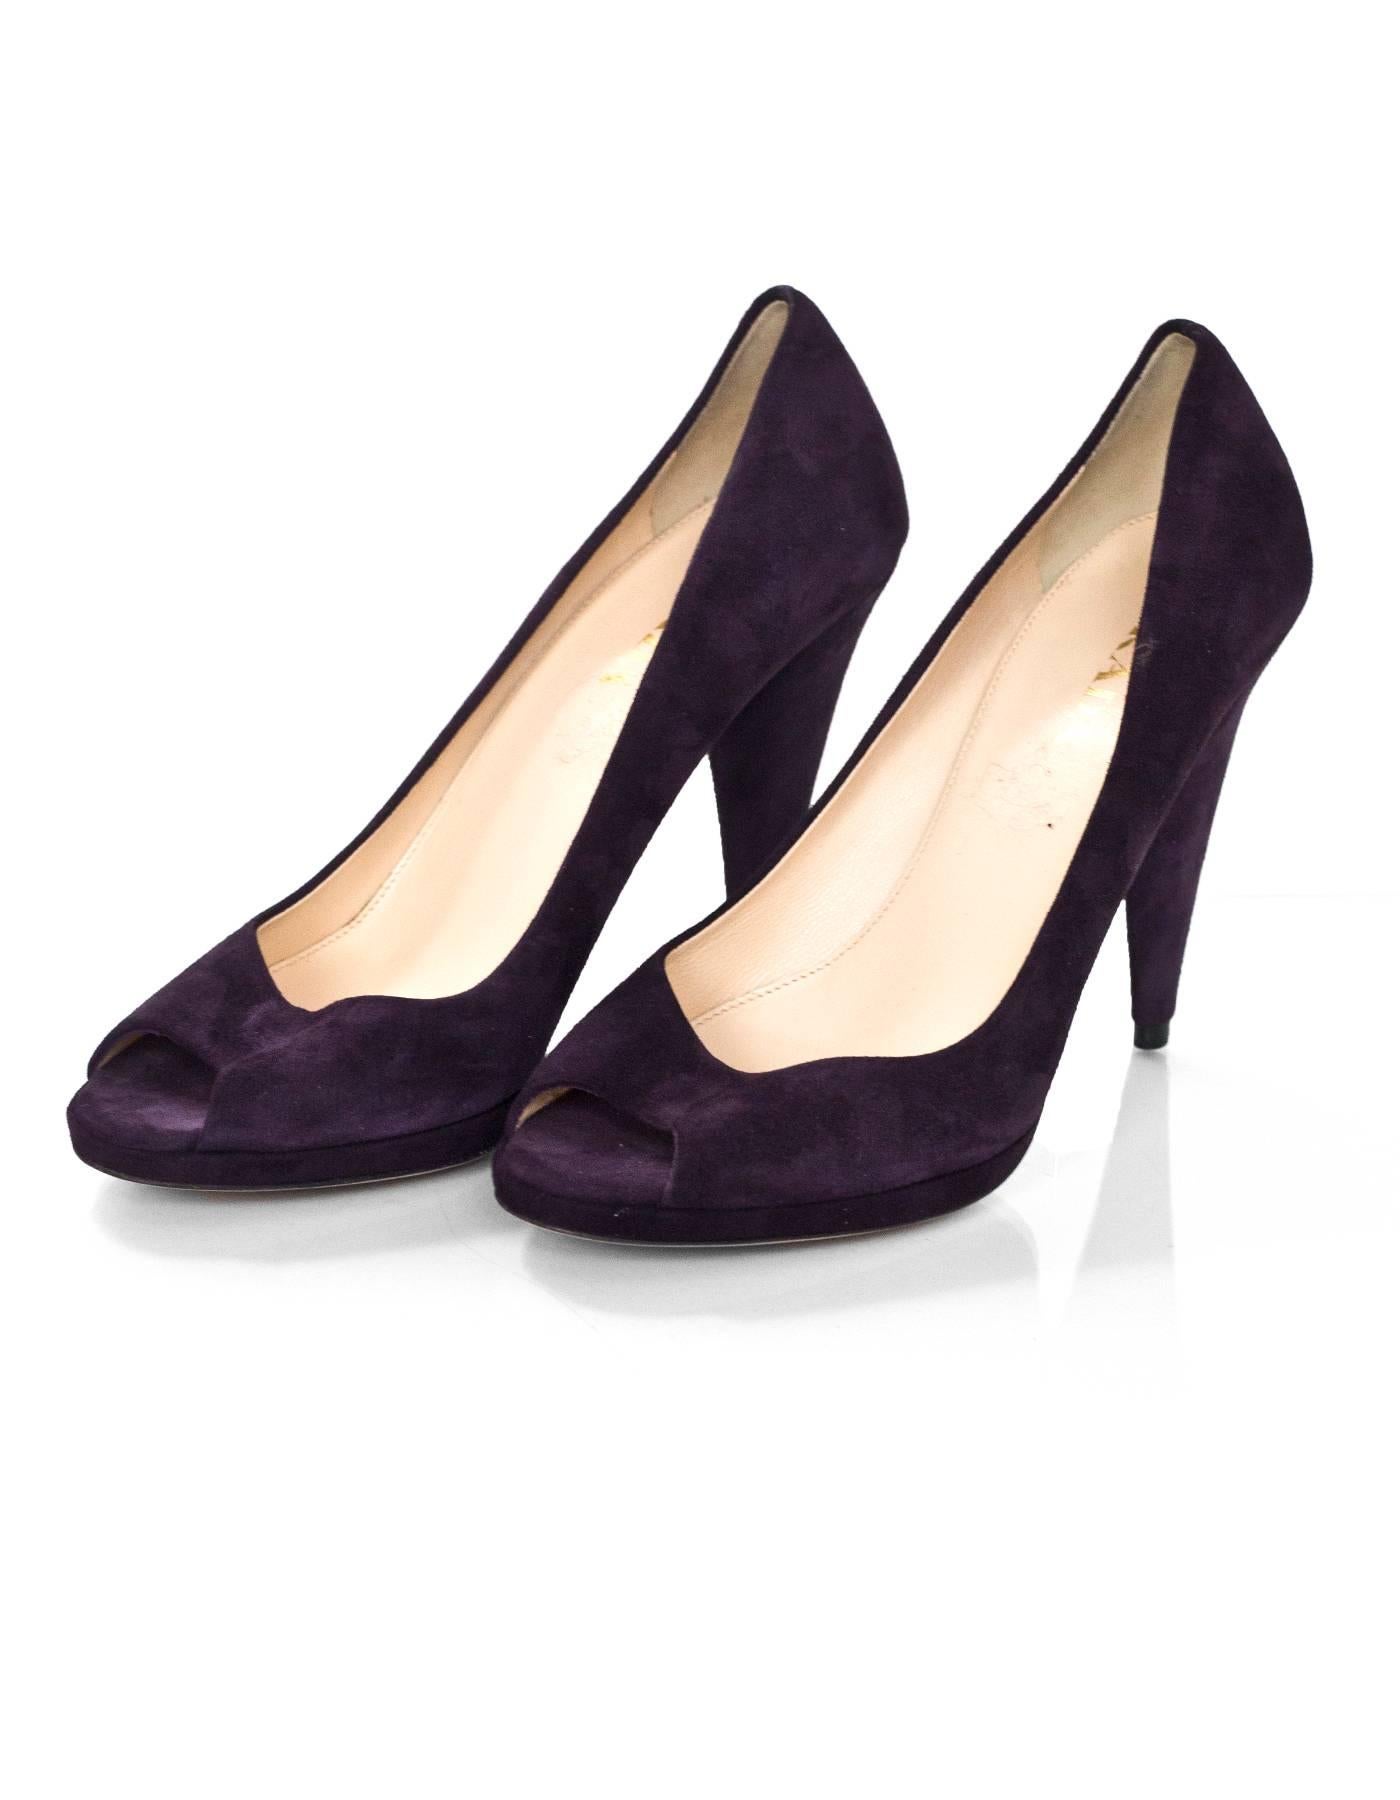 Prada Purple Suede Open-Toe Pumps Sz 37.5

Made In: Italy
Color: Purple
Materials: Suede
Closure/Opening: Slide on
Sole Stamp: Prada 37.5 Made in Italy
Overall Condition: Excellent pre-owned condition, light wear at insoles and outsoles, marks at